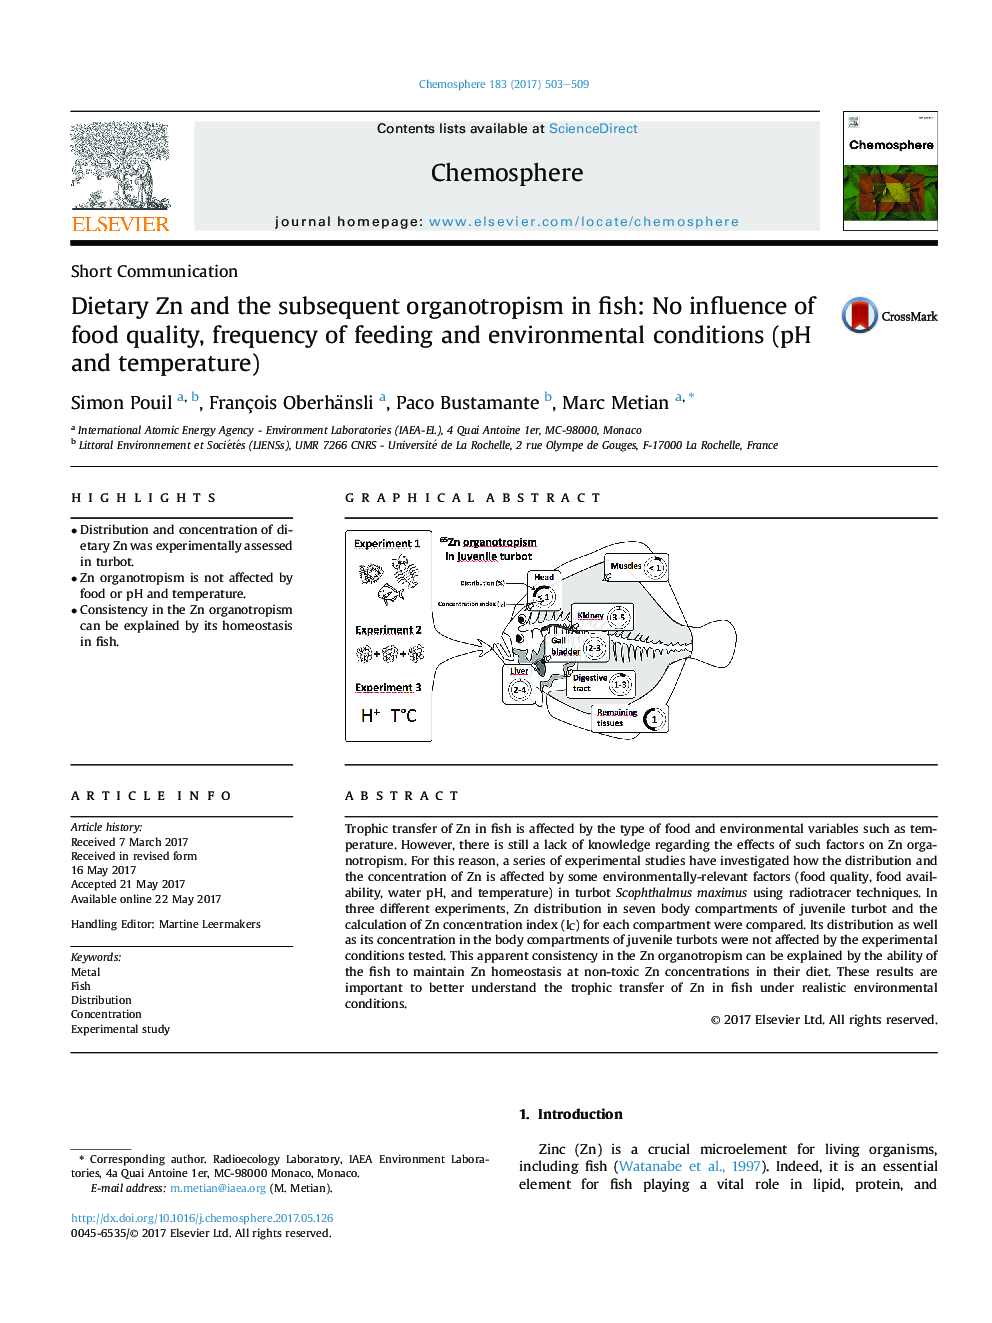 Short CommunicationDietary Zn and the subsequent organotropism in fish: No influence of food quality, frequency of feeding and environmental conditions (pH and temperature)